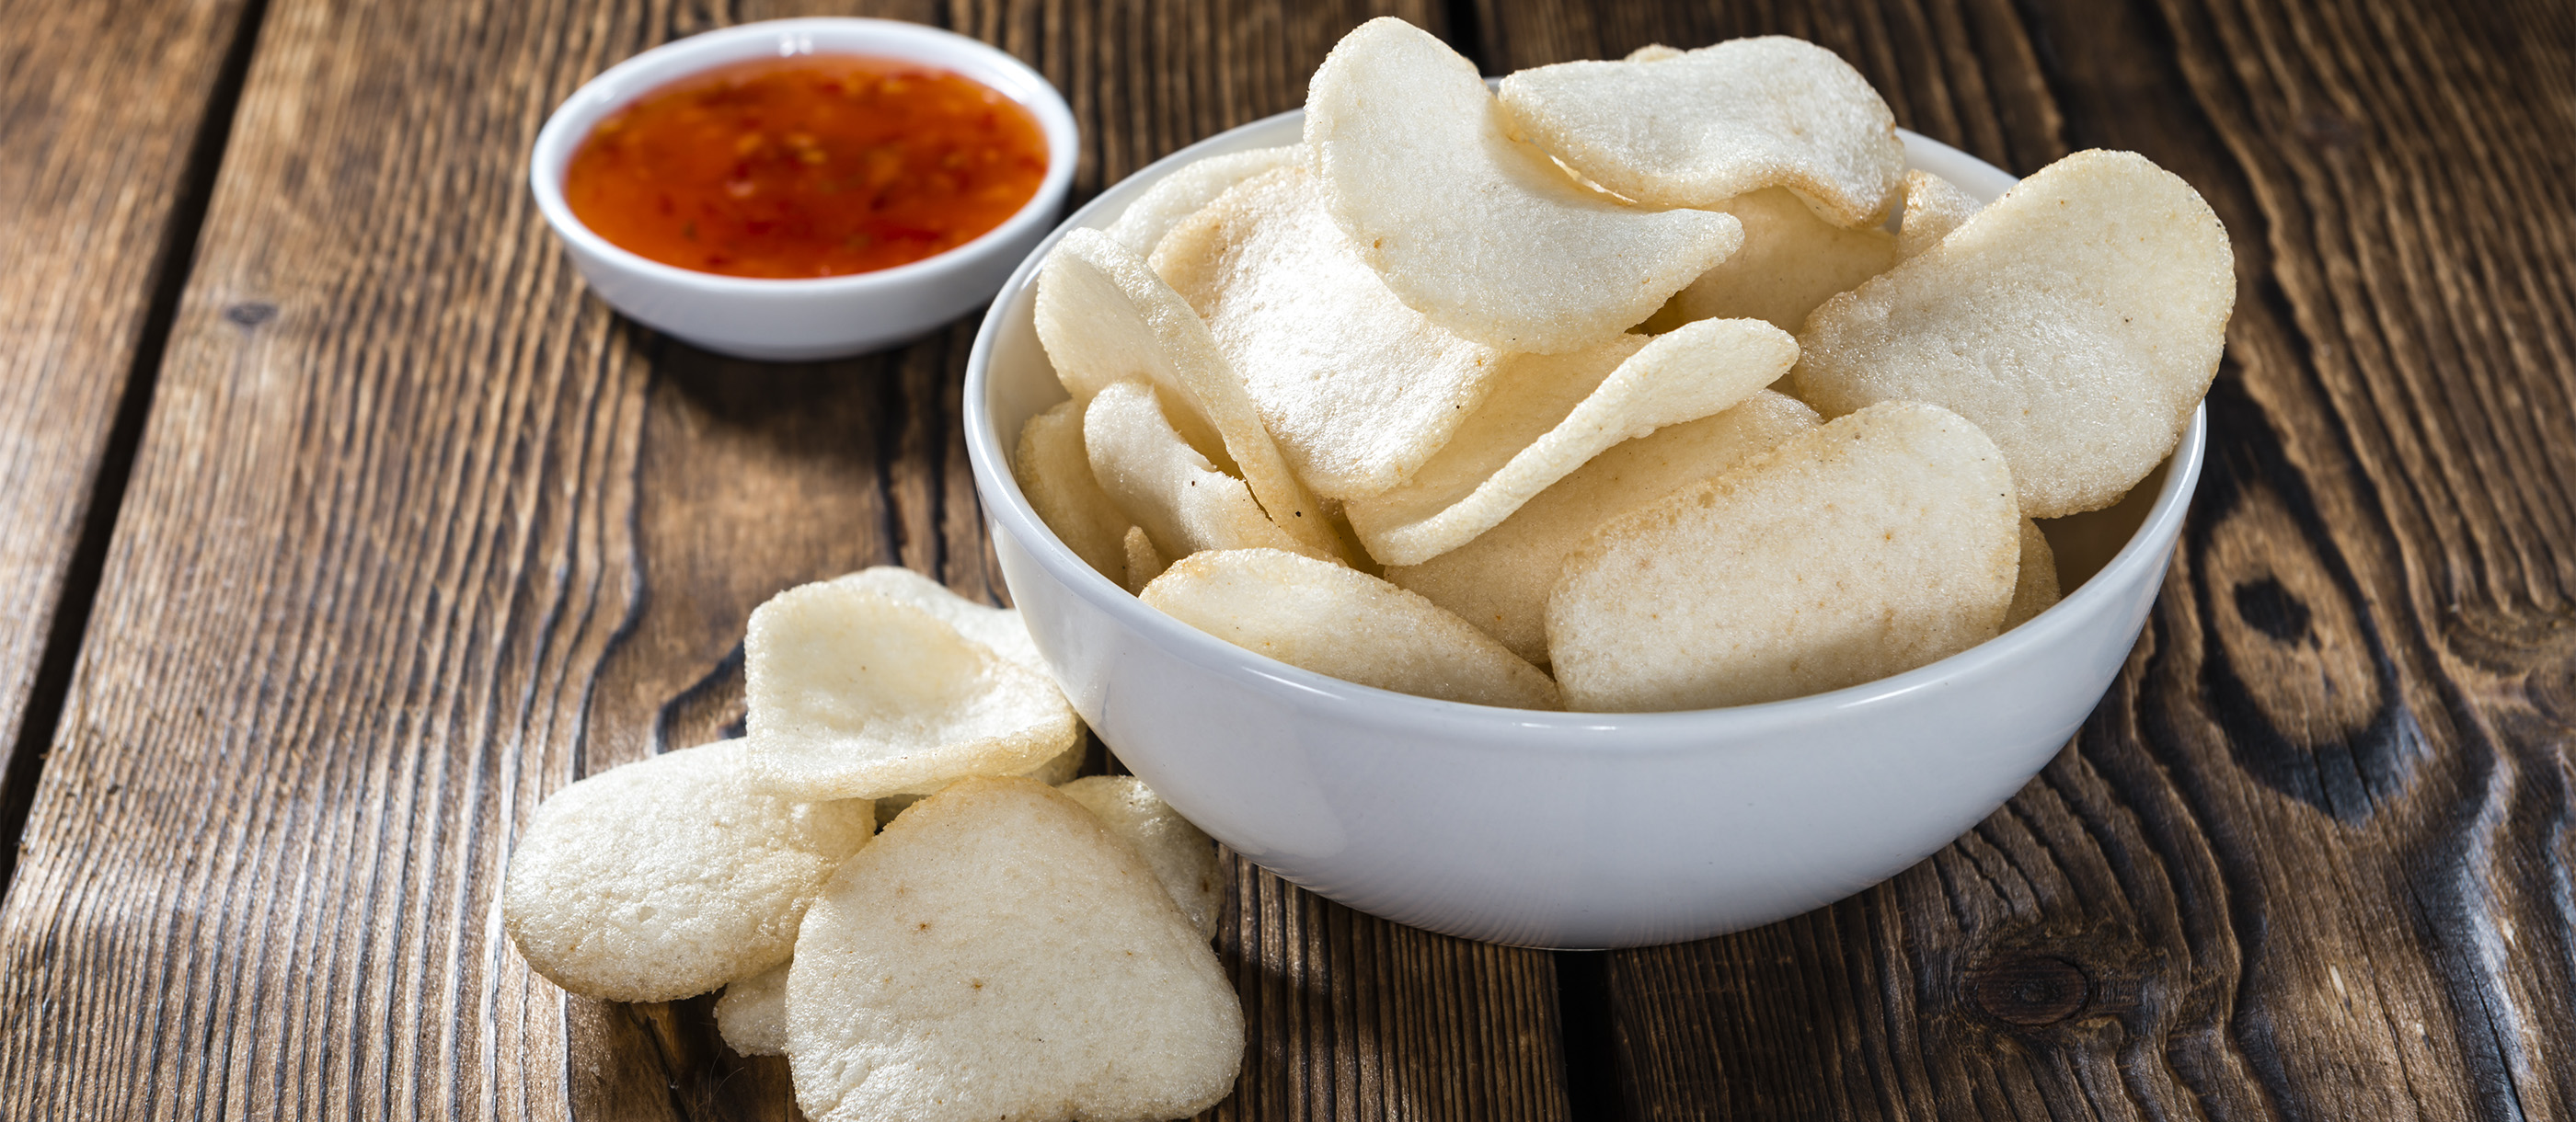  Krupuk  Traditional Snack From Indonesia Southeast Asia